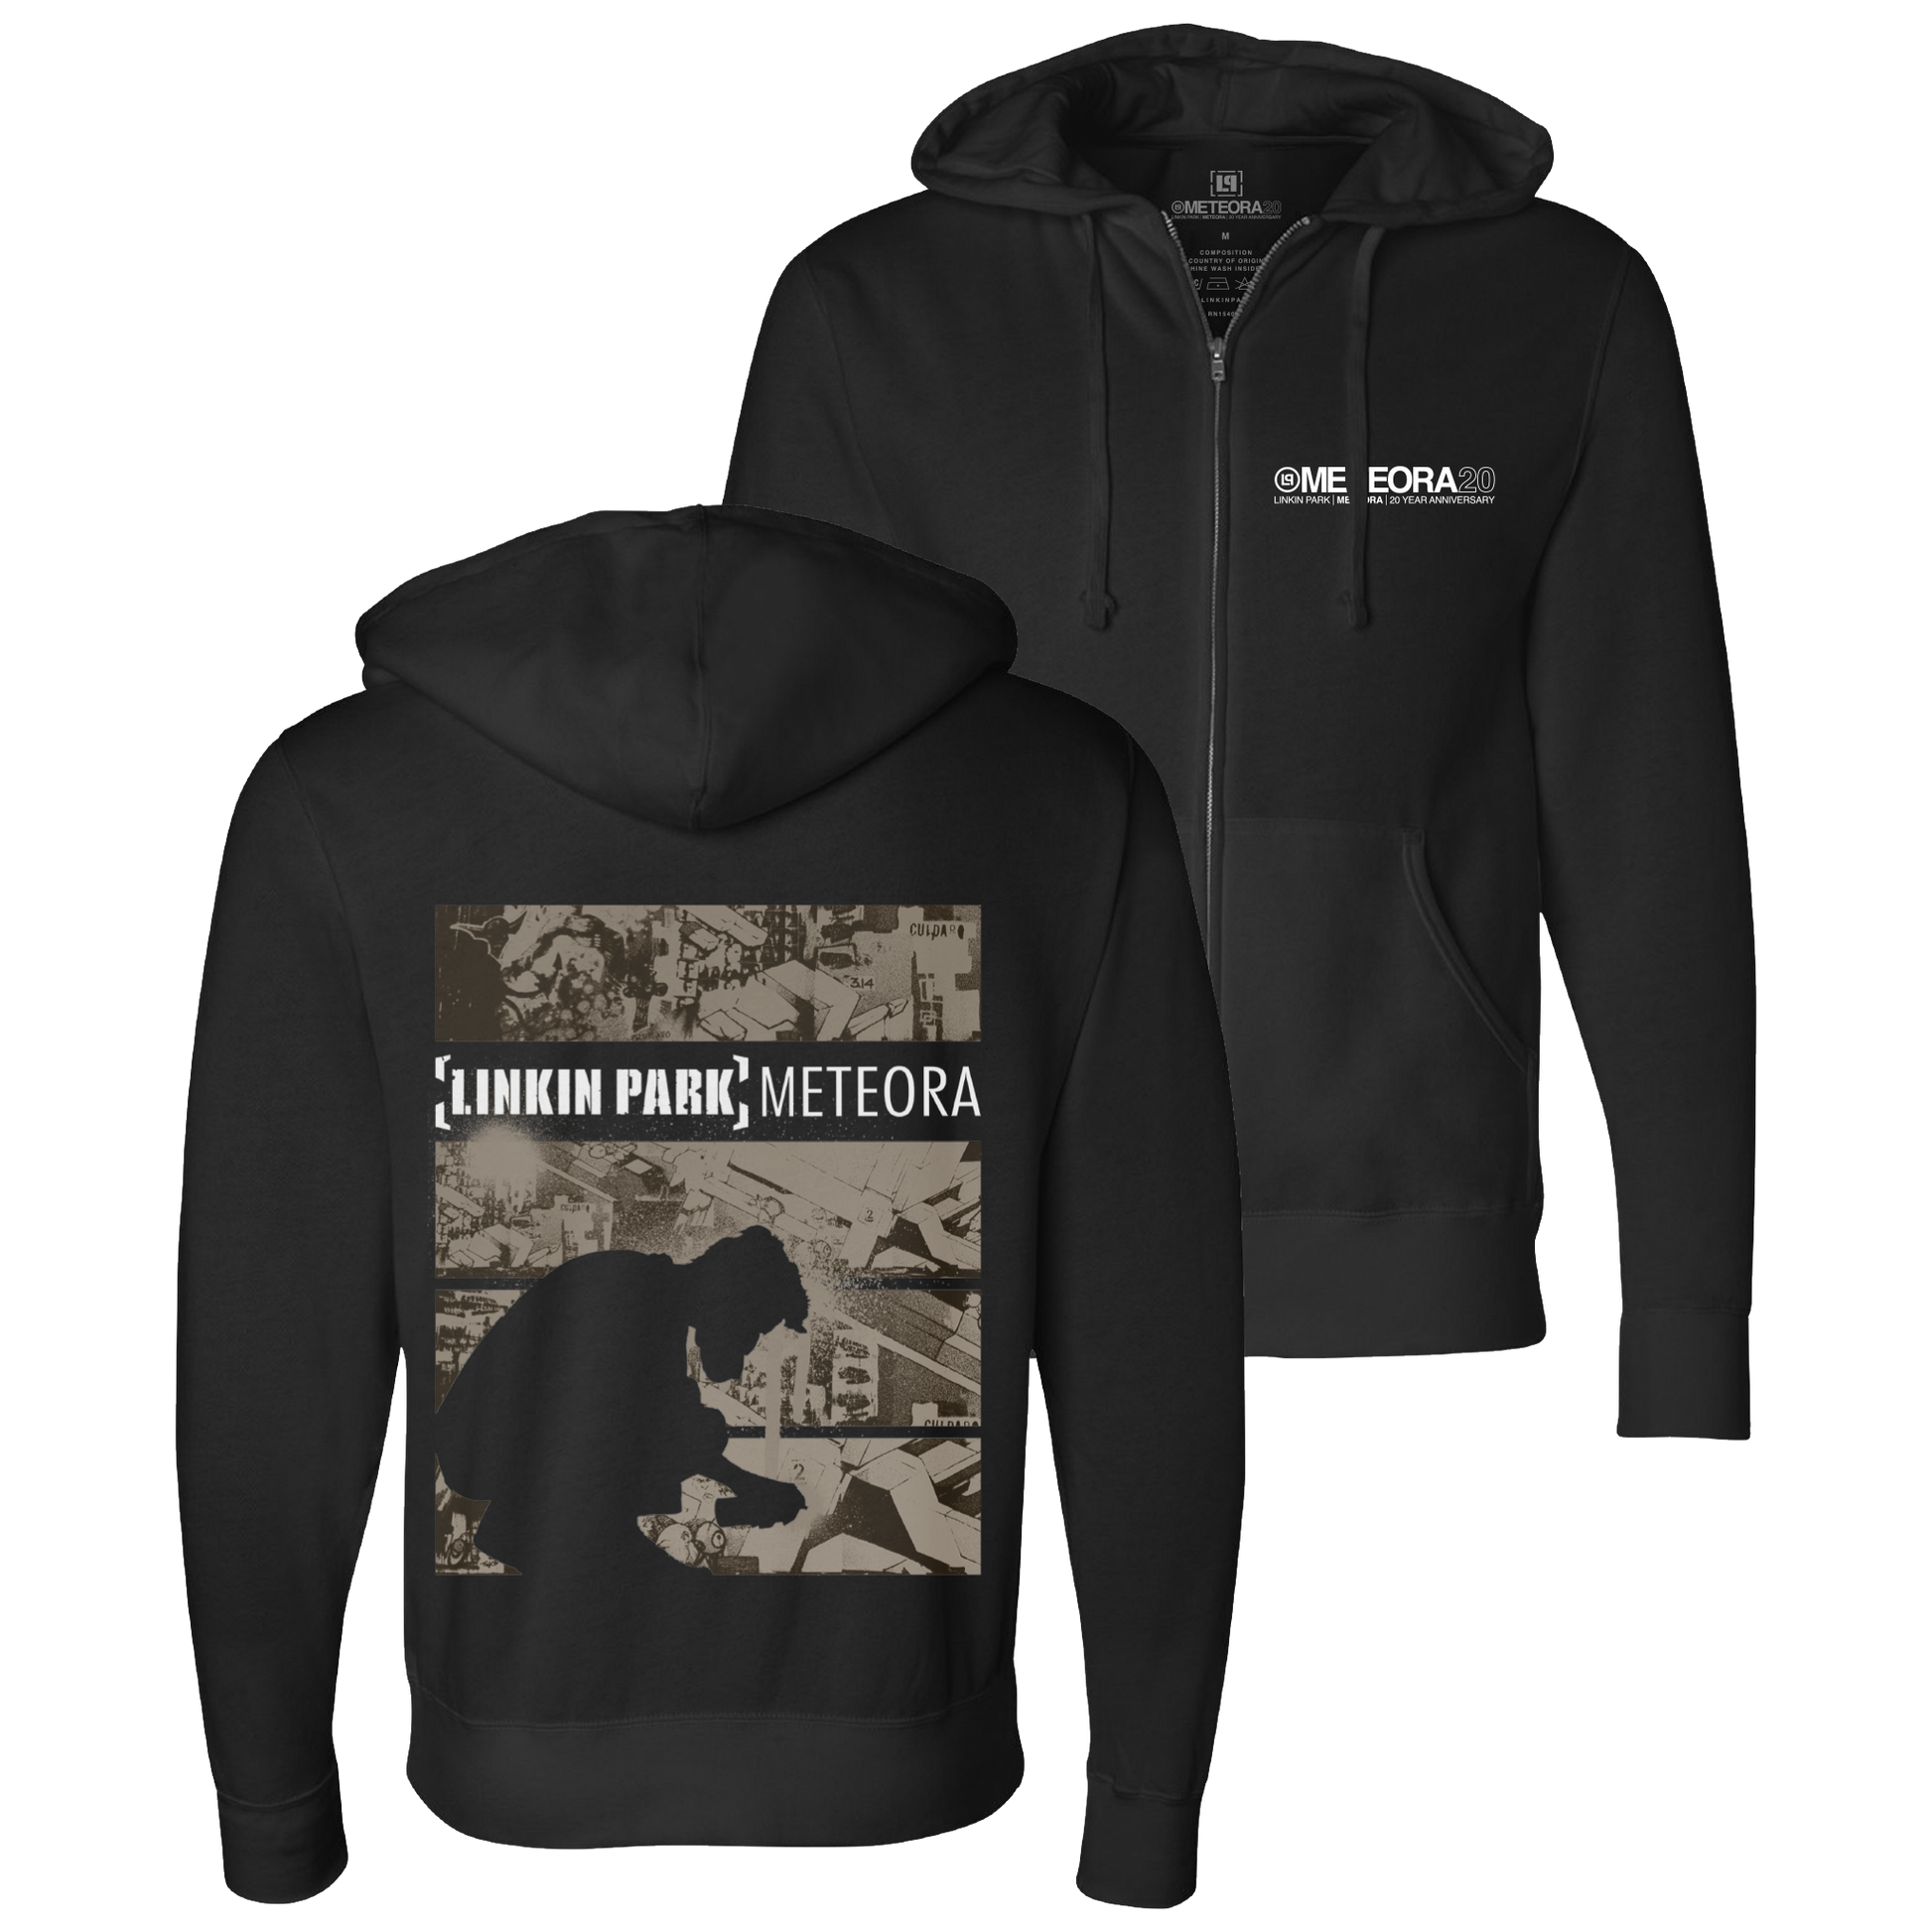 Meteora Drip Collage Black Hoodie Front and Back